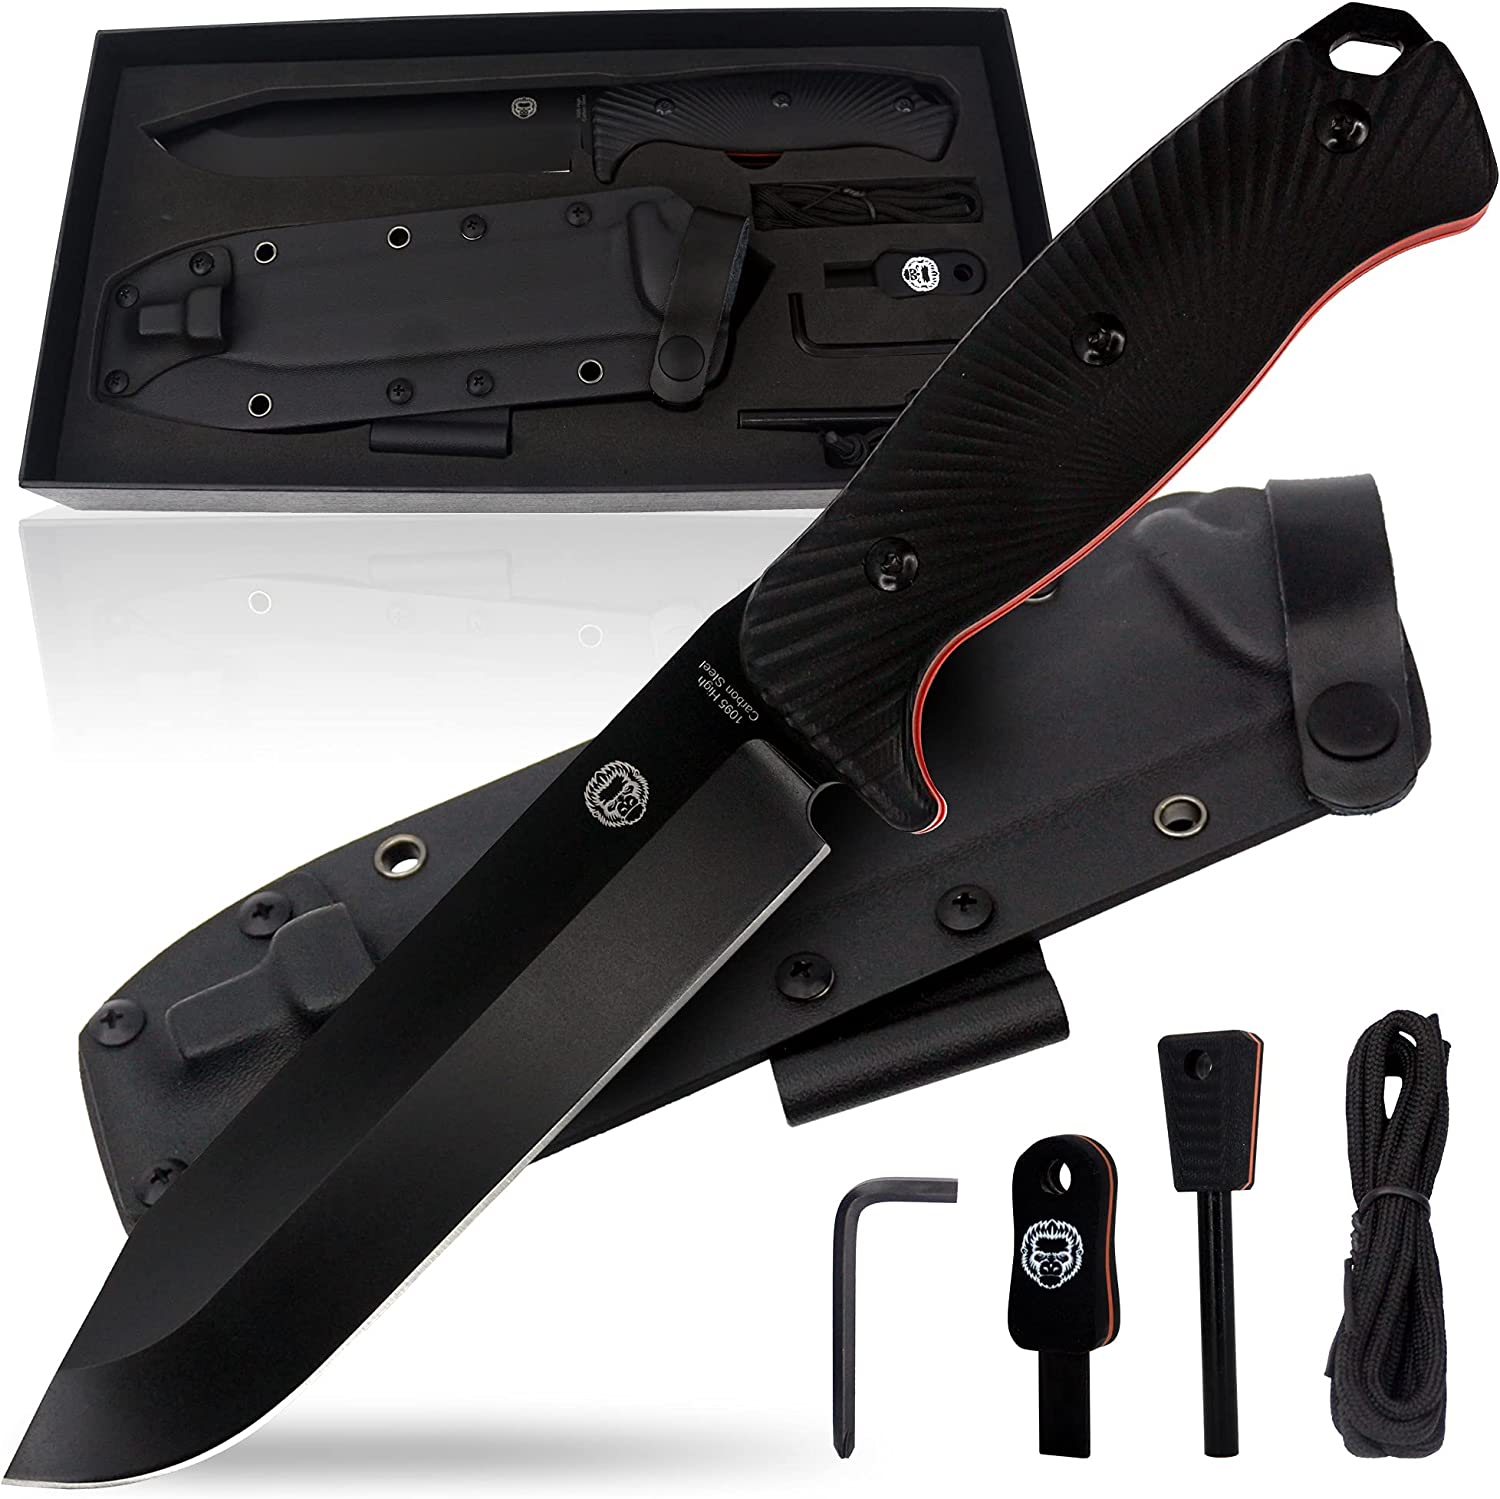 Bushcraft Survival Camping Knife | 1095 High Carbon Steel Fixed Blade Hunting Knife with Sheath | Fire Starter, G10 Scraper & Paracord | Outdoor Chopping Knife |Full Tang Large Survival Knife Kit In Gift Box (Black & Orange)